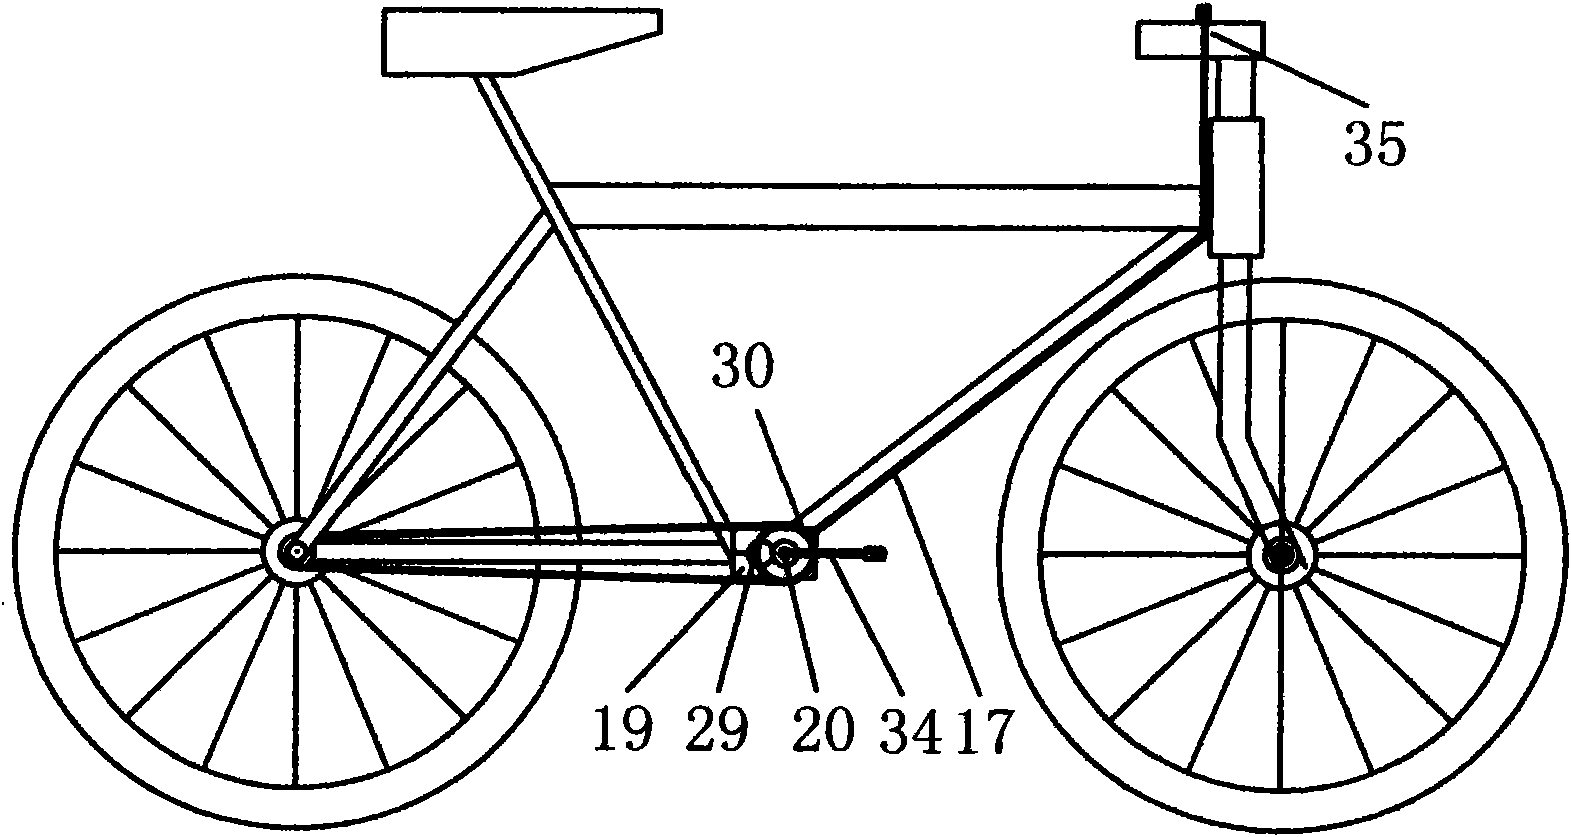 Bicycle with miniature box transmission on middle axle